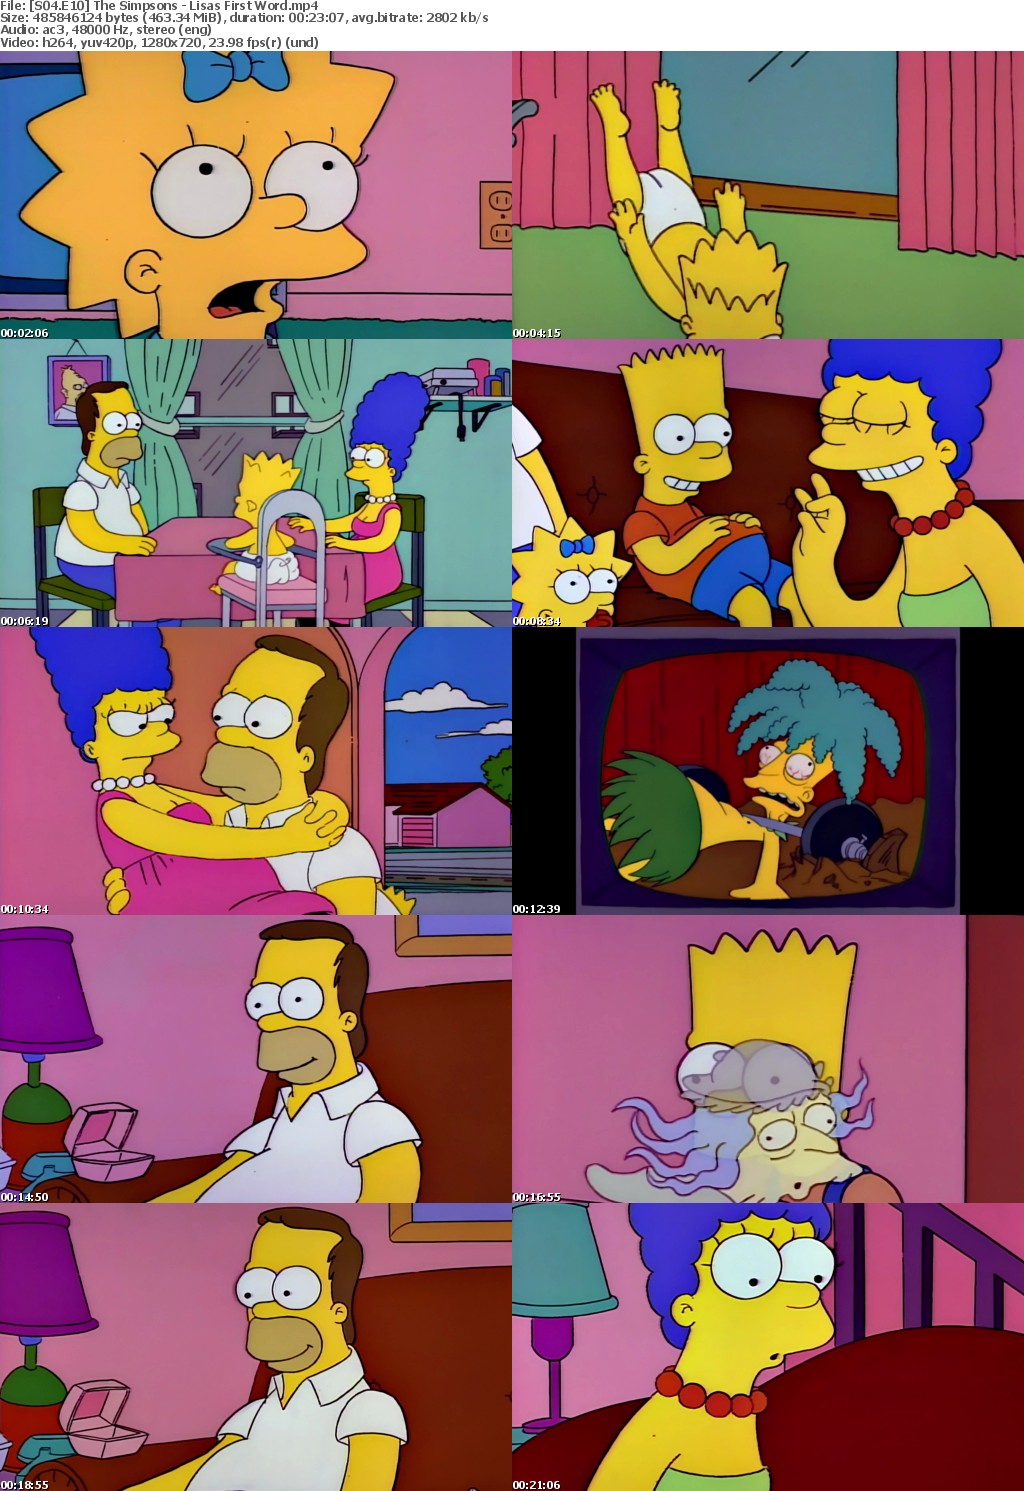 The Simpsons S4 E10 Lisa's First Word MP4 720p H264 WEBRip EzzRips